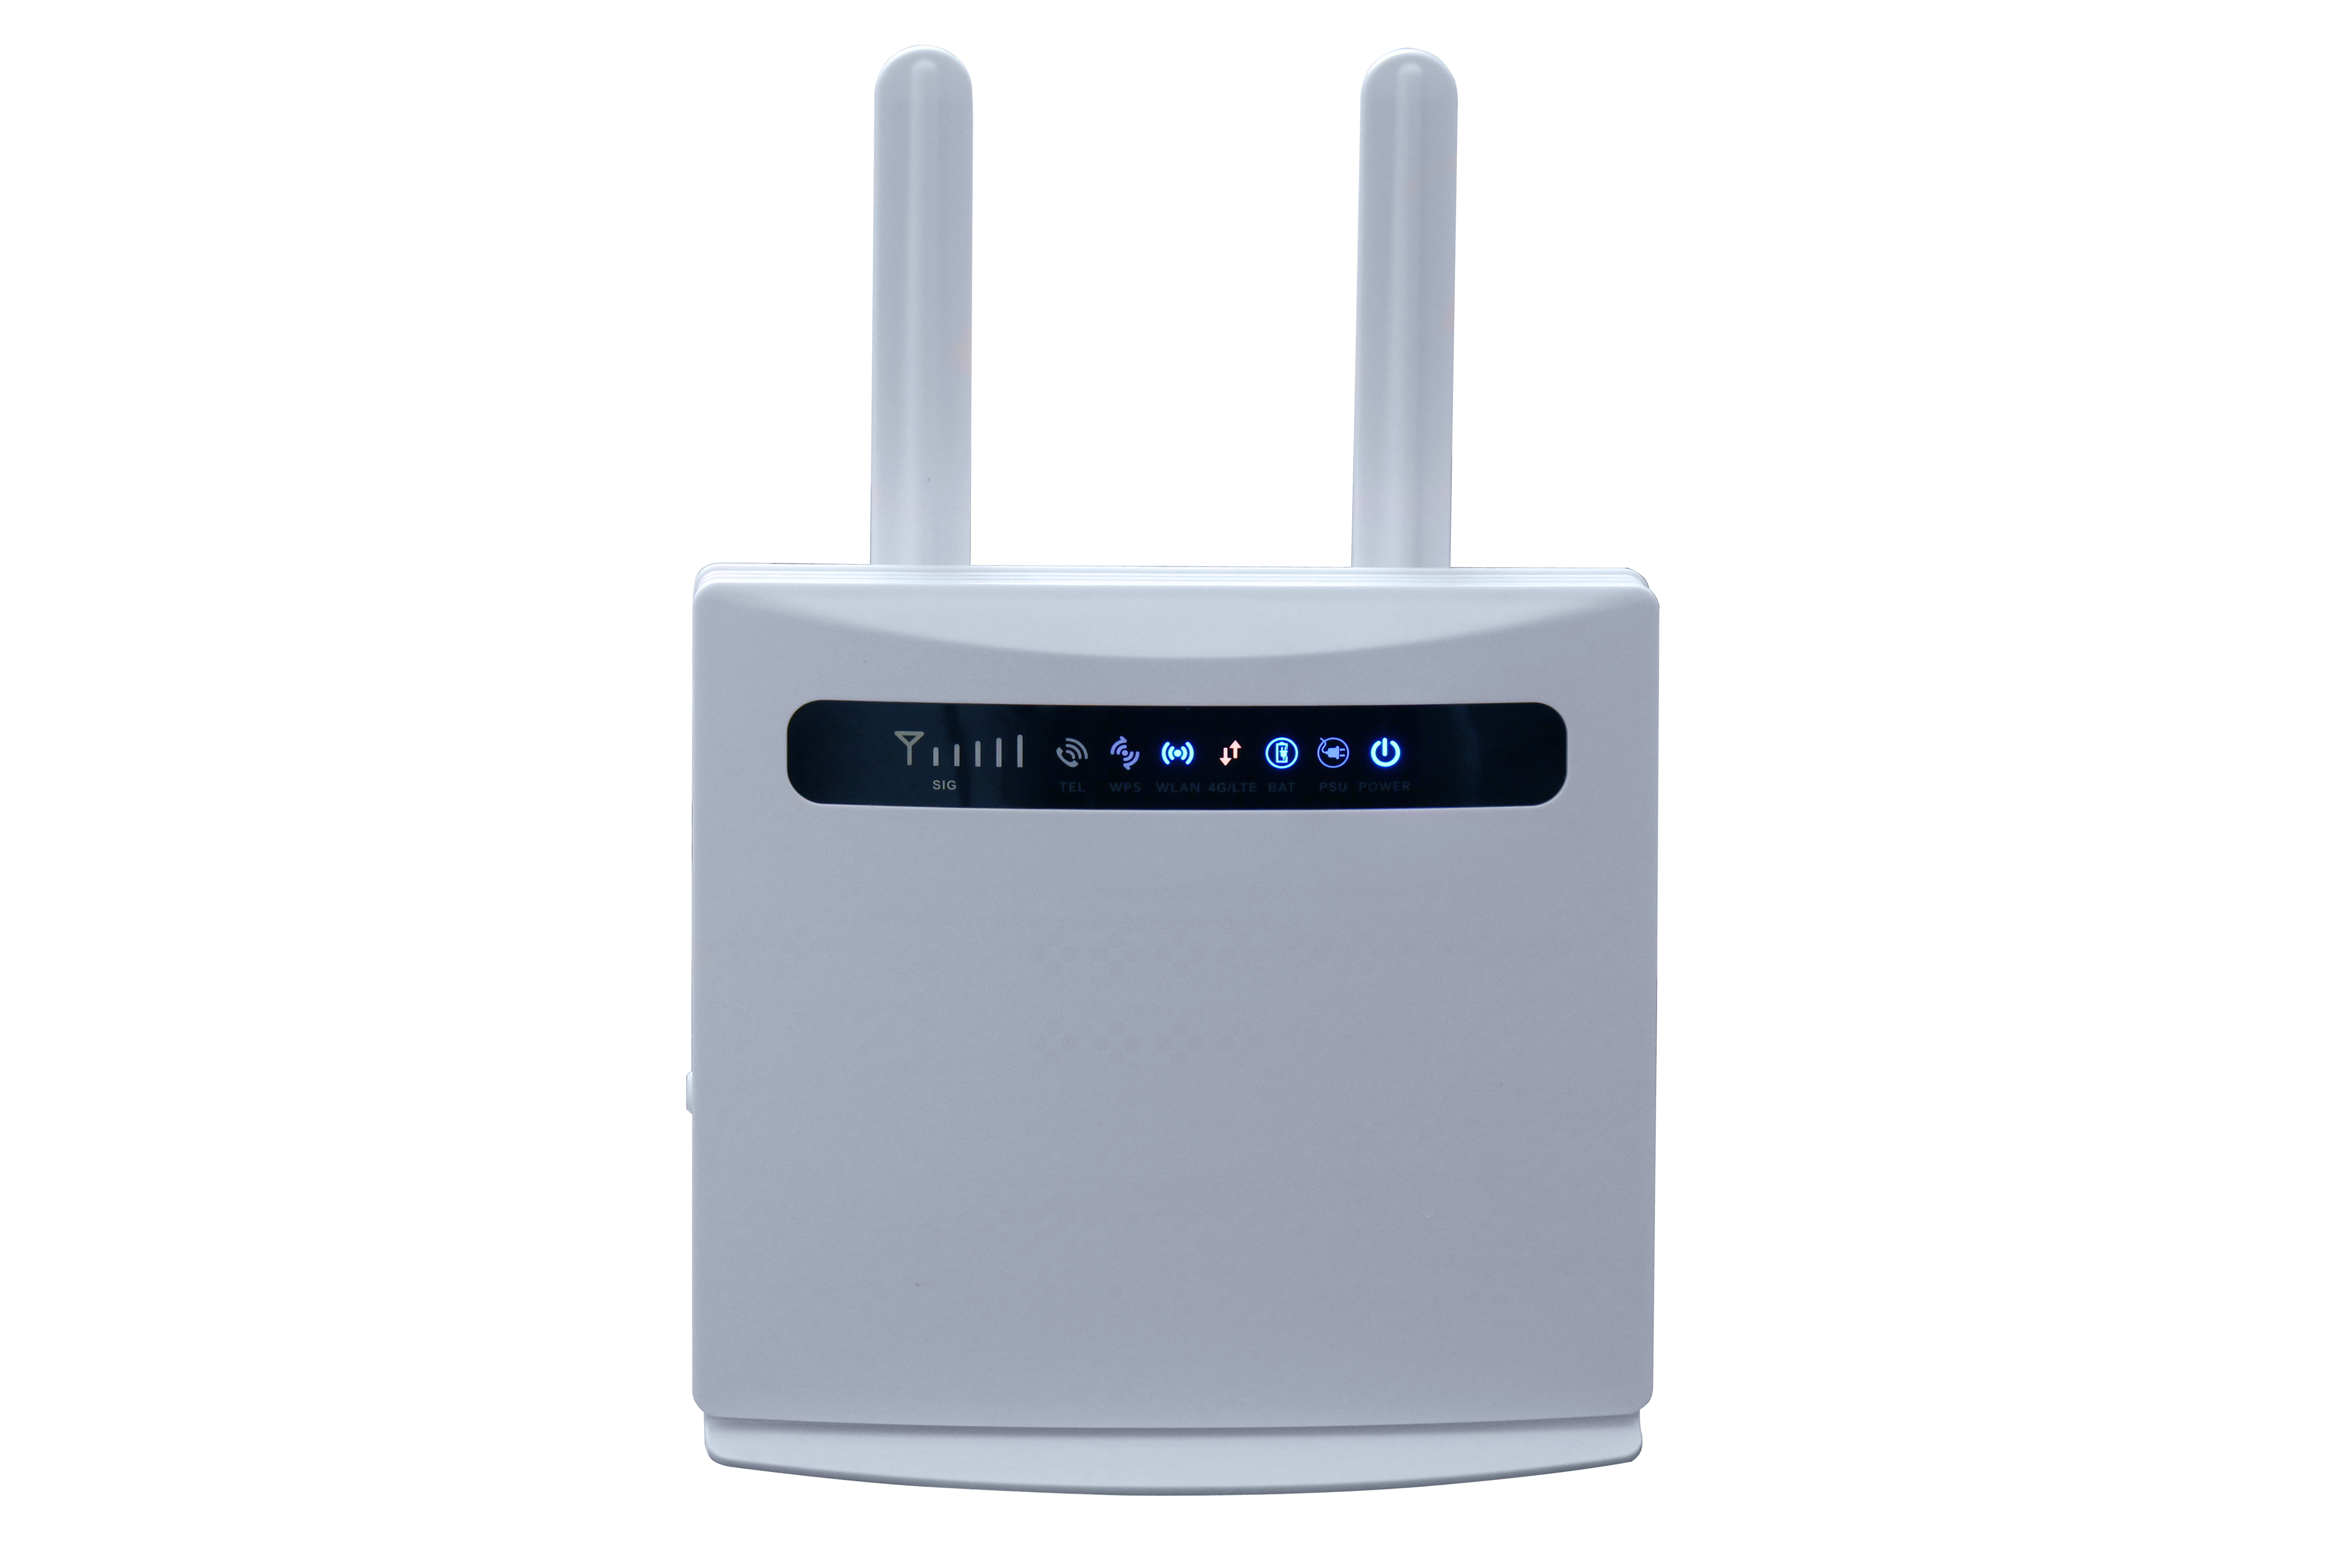 World vision 4g connect. Роутер World Vision 4g connect. Wi-Fi роутер World Vision 4g connect Mini. ZLT p21 LTE Wireless Router. World Vision 4g connect 2.